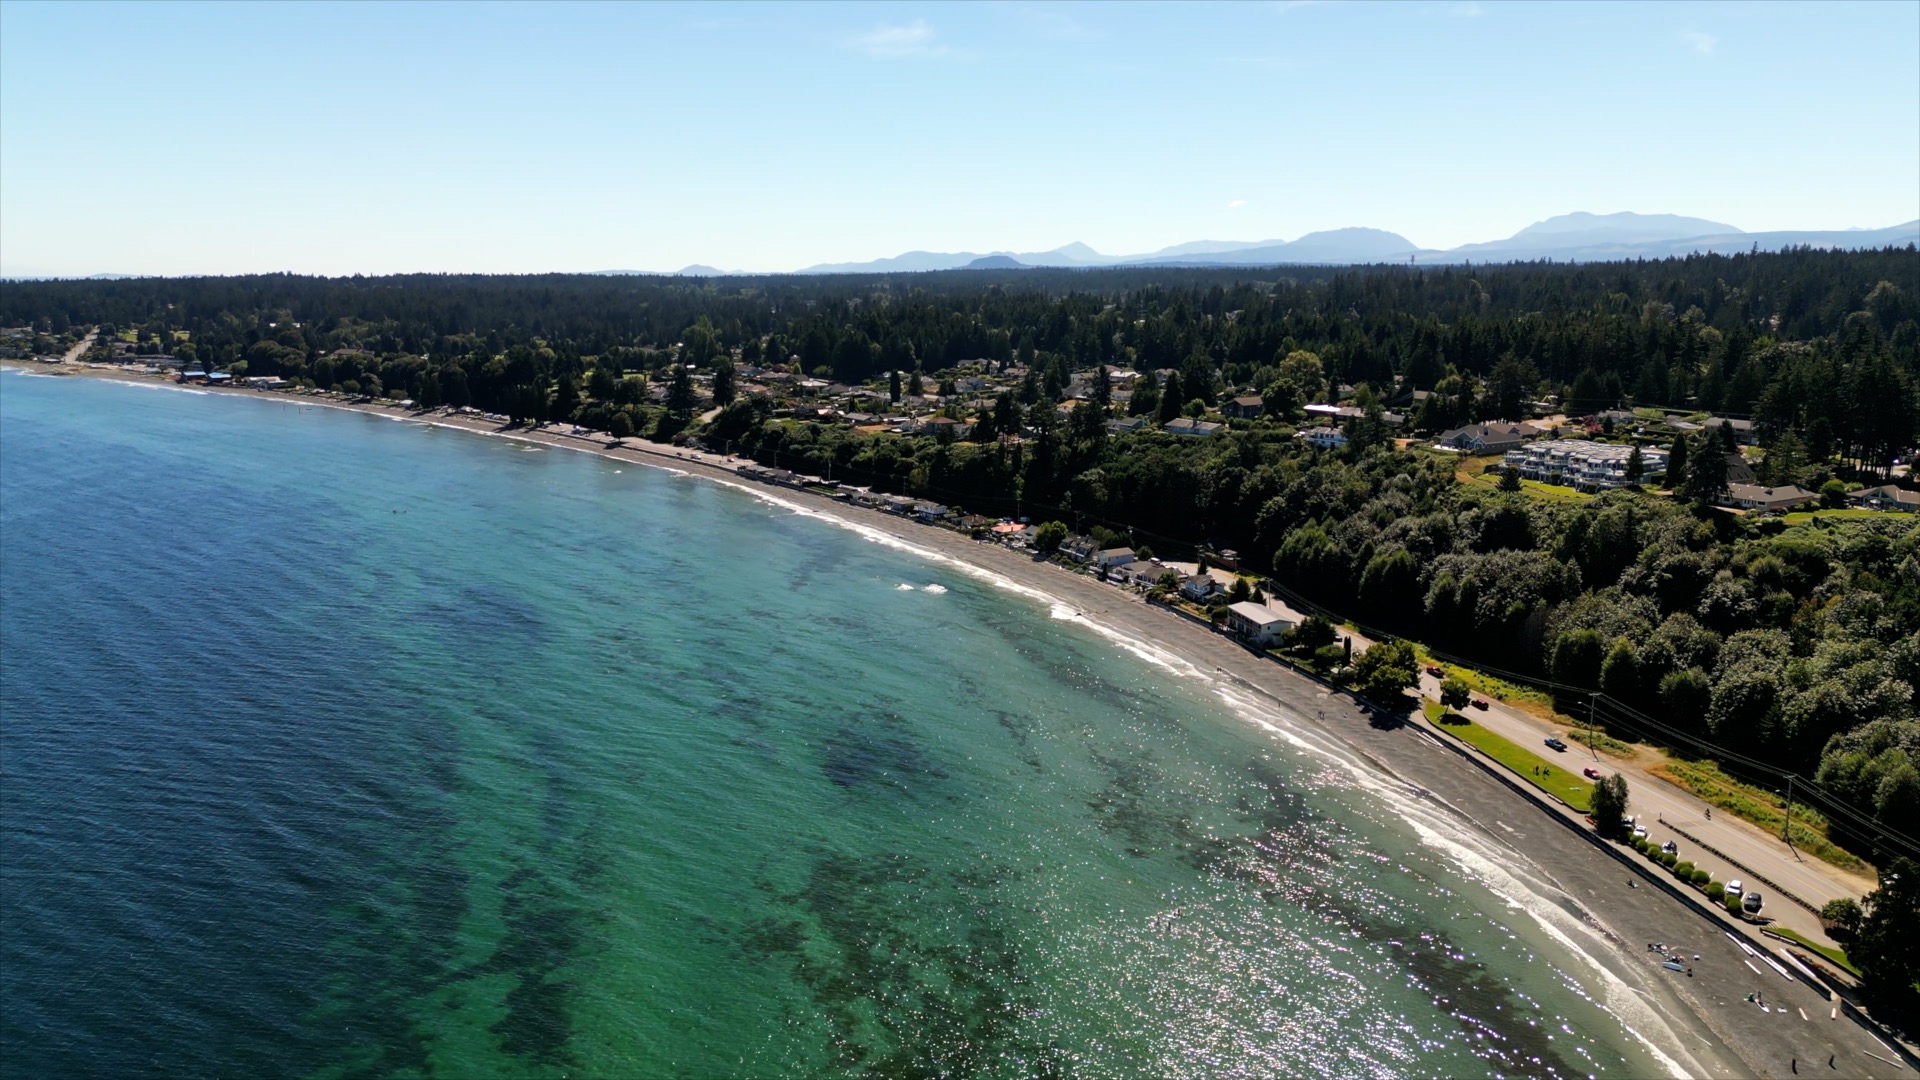 Aerial view of Qualicum Beach with beautiful blue waters